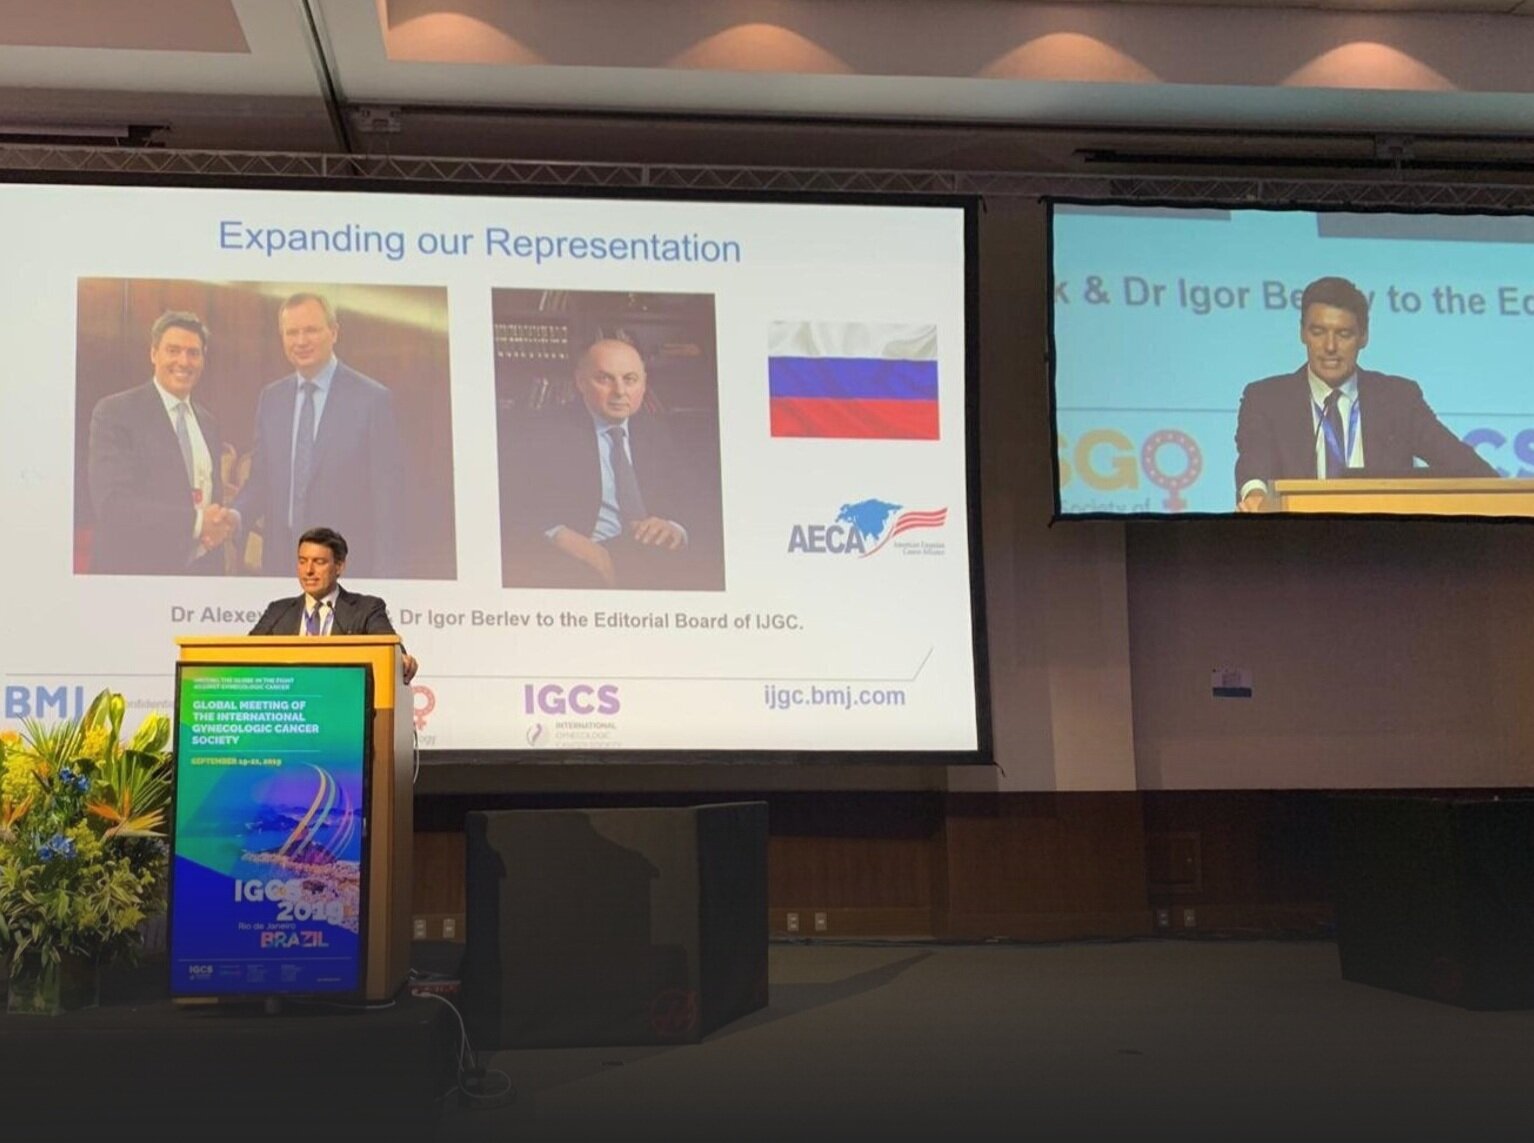 2019: Dr. Pedro Ramirez (MD Anderson) presents AECA-launched Russian strategic partnership at IGCS Annual Global Meeting in Rio de Janeiro, Brazil